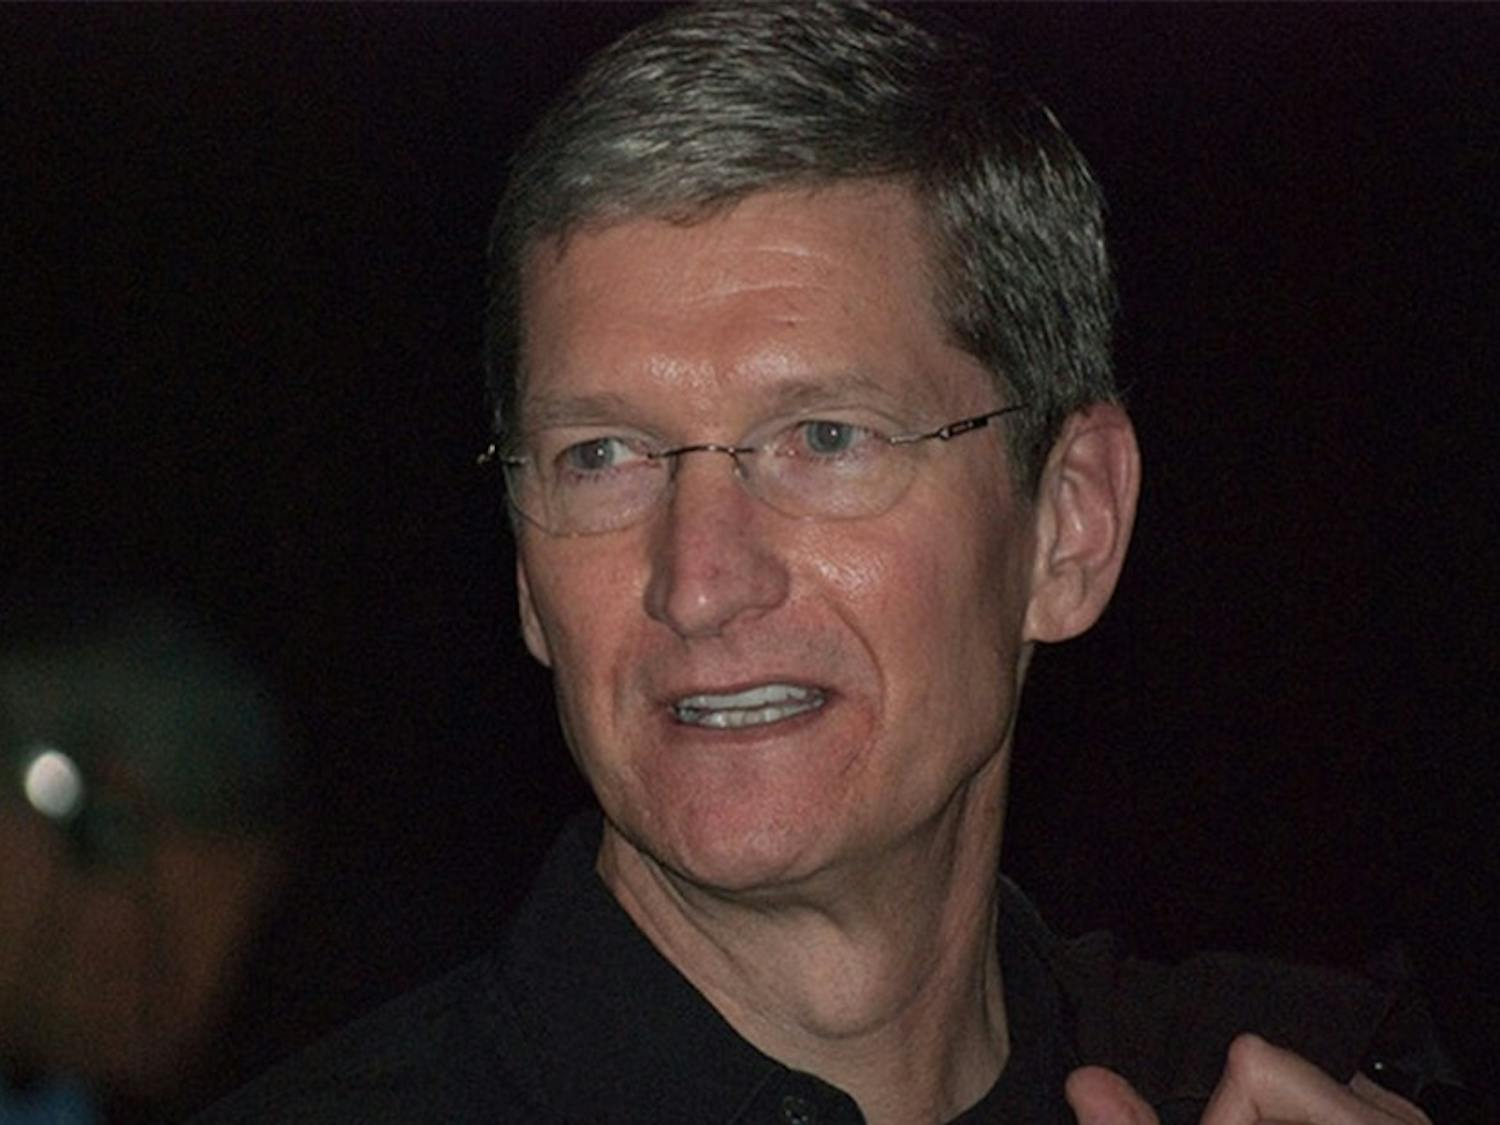 Apple CEO Tim Cook, Fuqua ’88, wrote in an open letter online last month that the government’s demands threaten the security of the company’s customers.